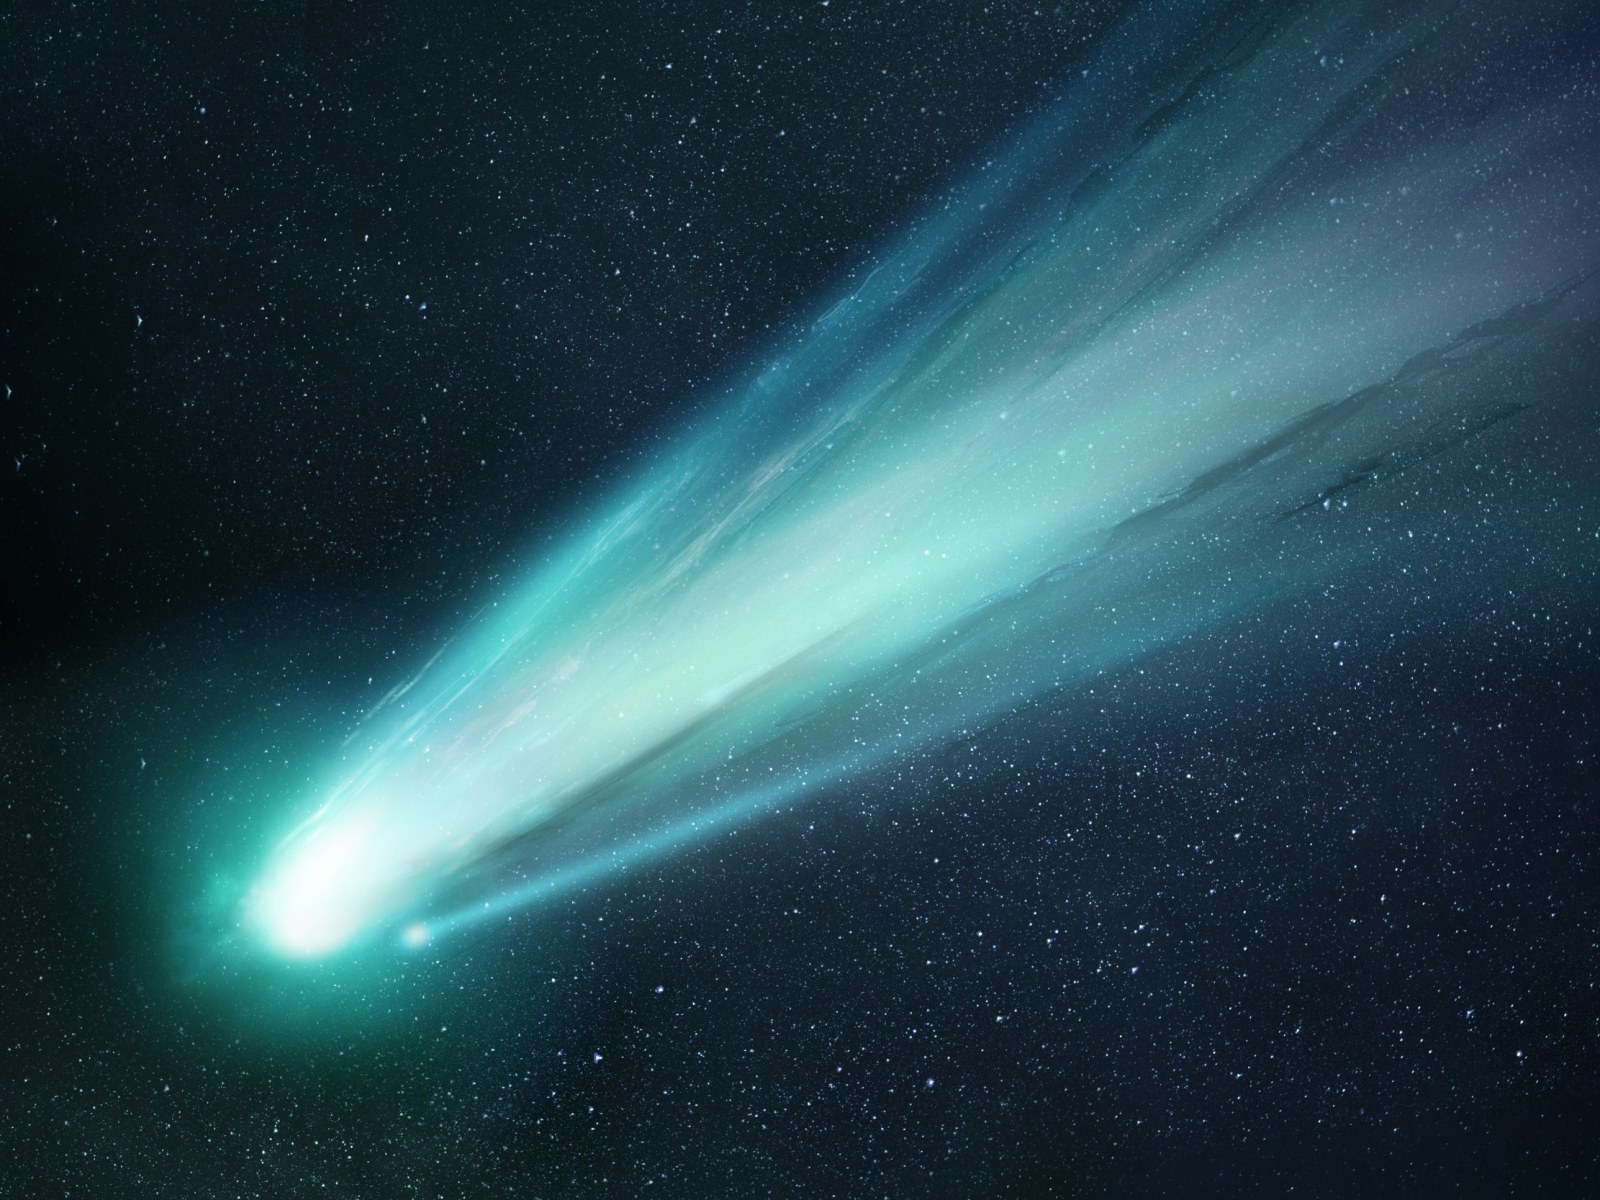 Comet returns in 50000 years, don't miss it again